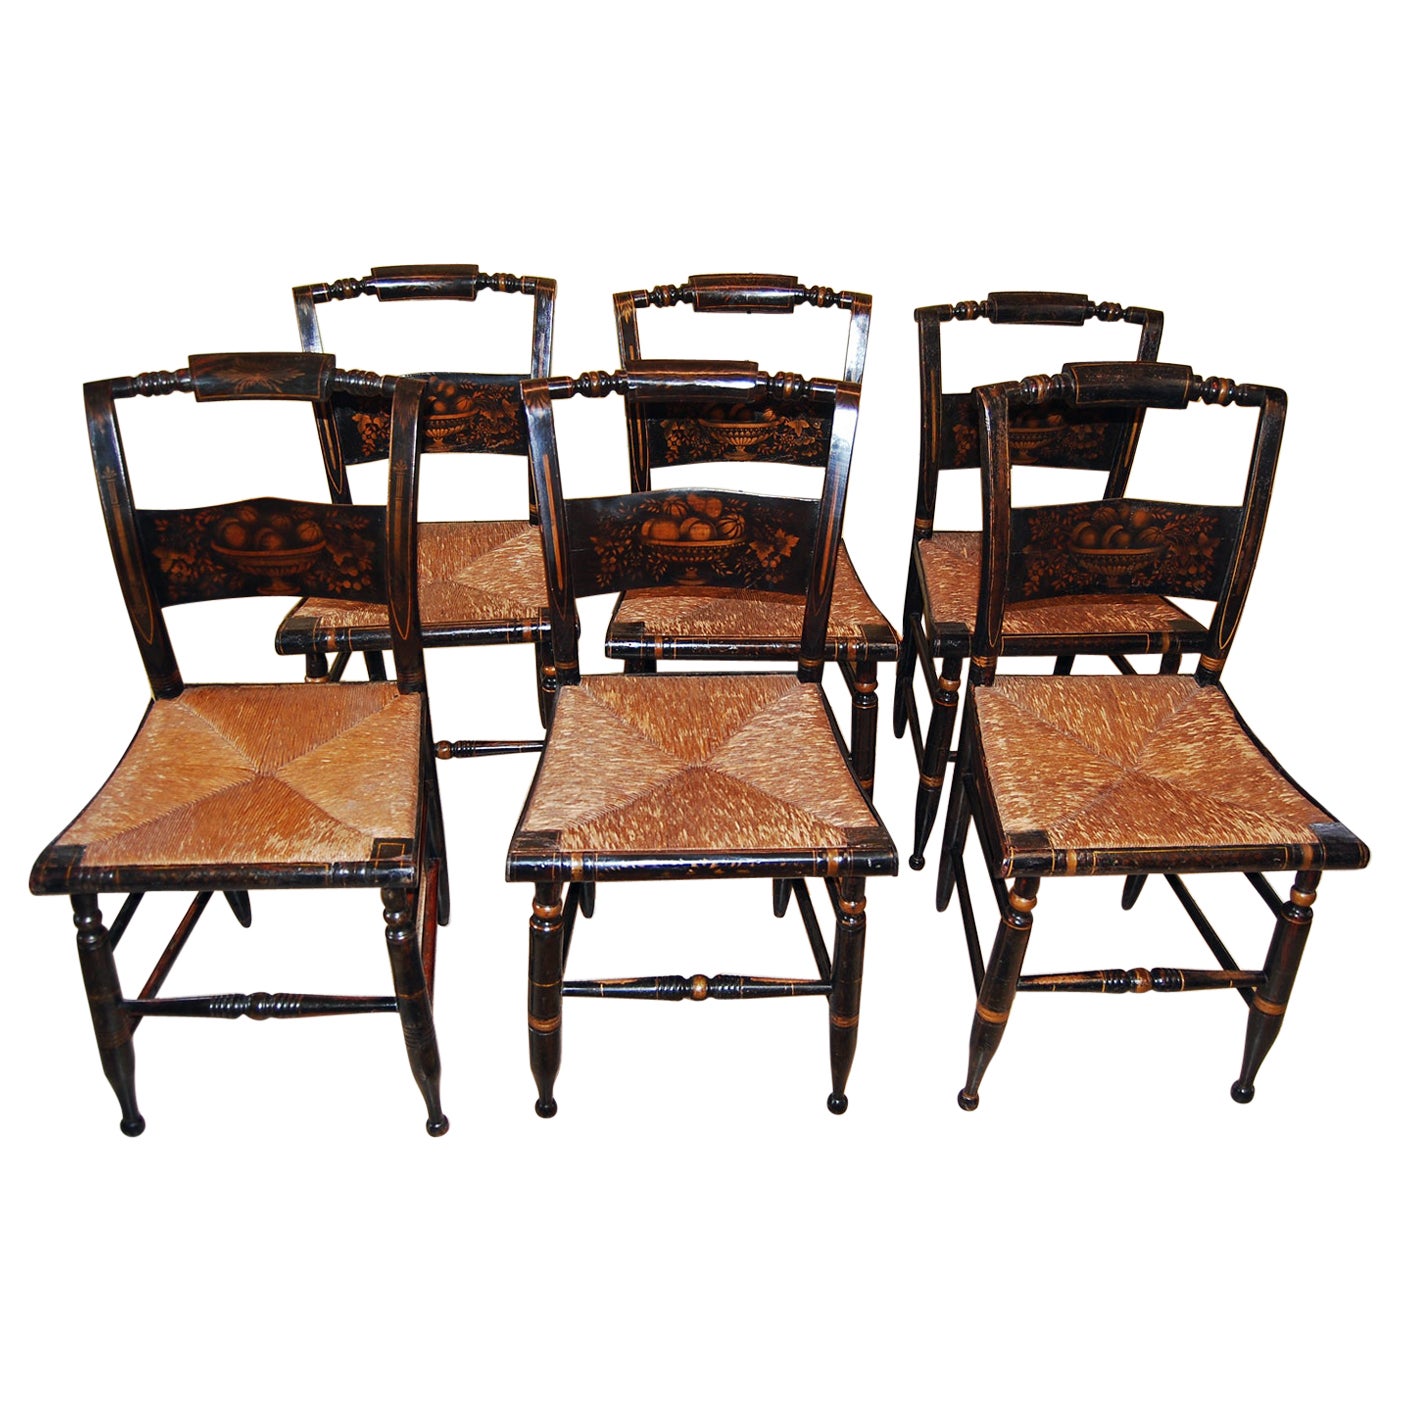 American Early 19th Century Set of Six Hitchcock Type Chairs Original Decoration